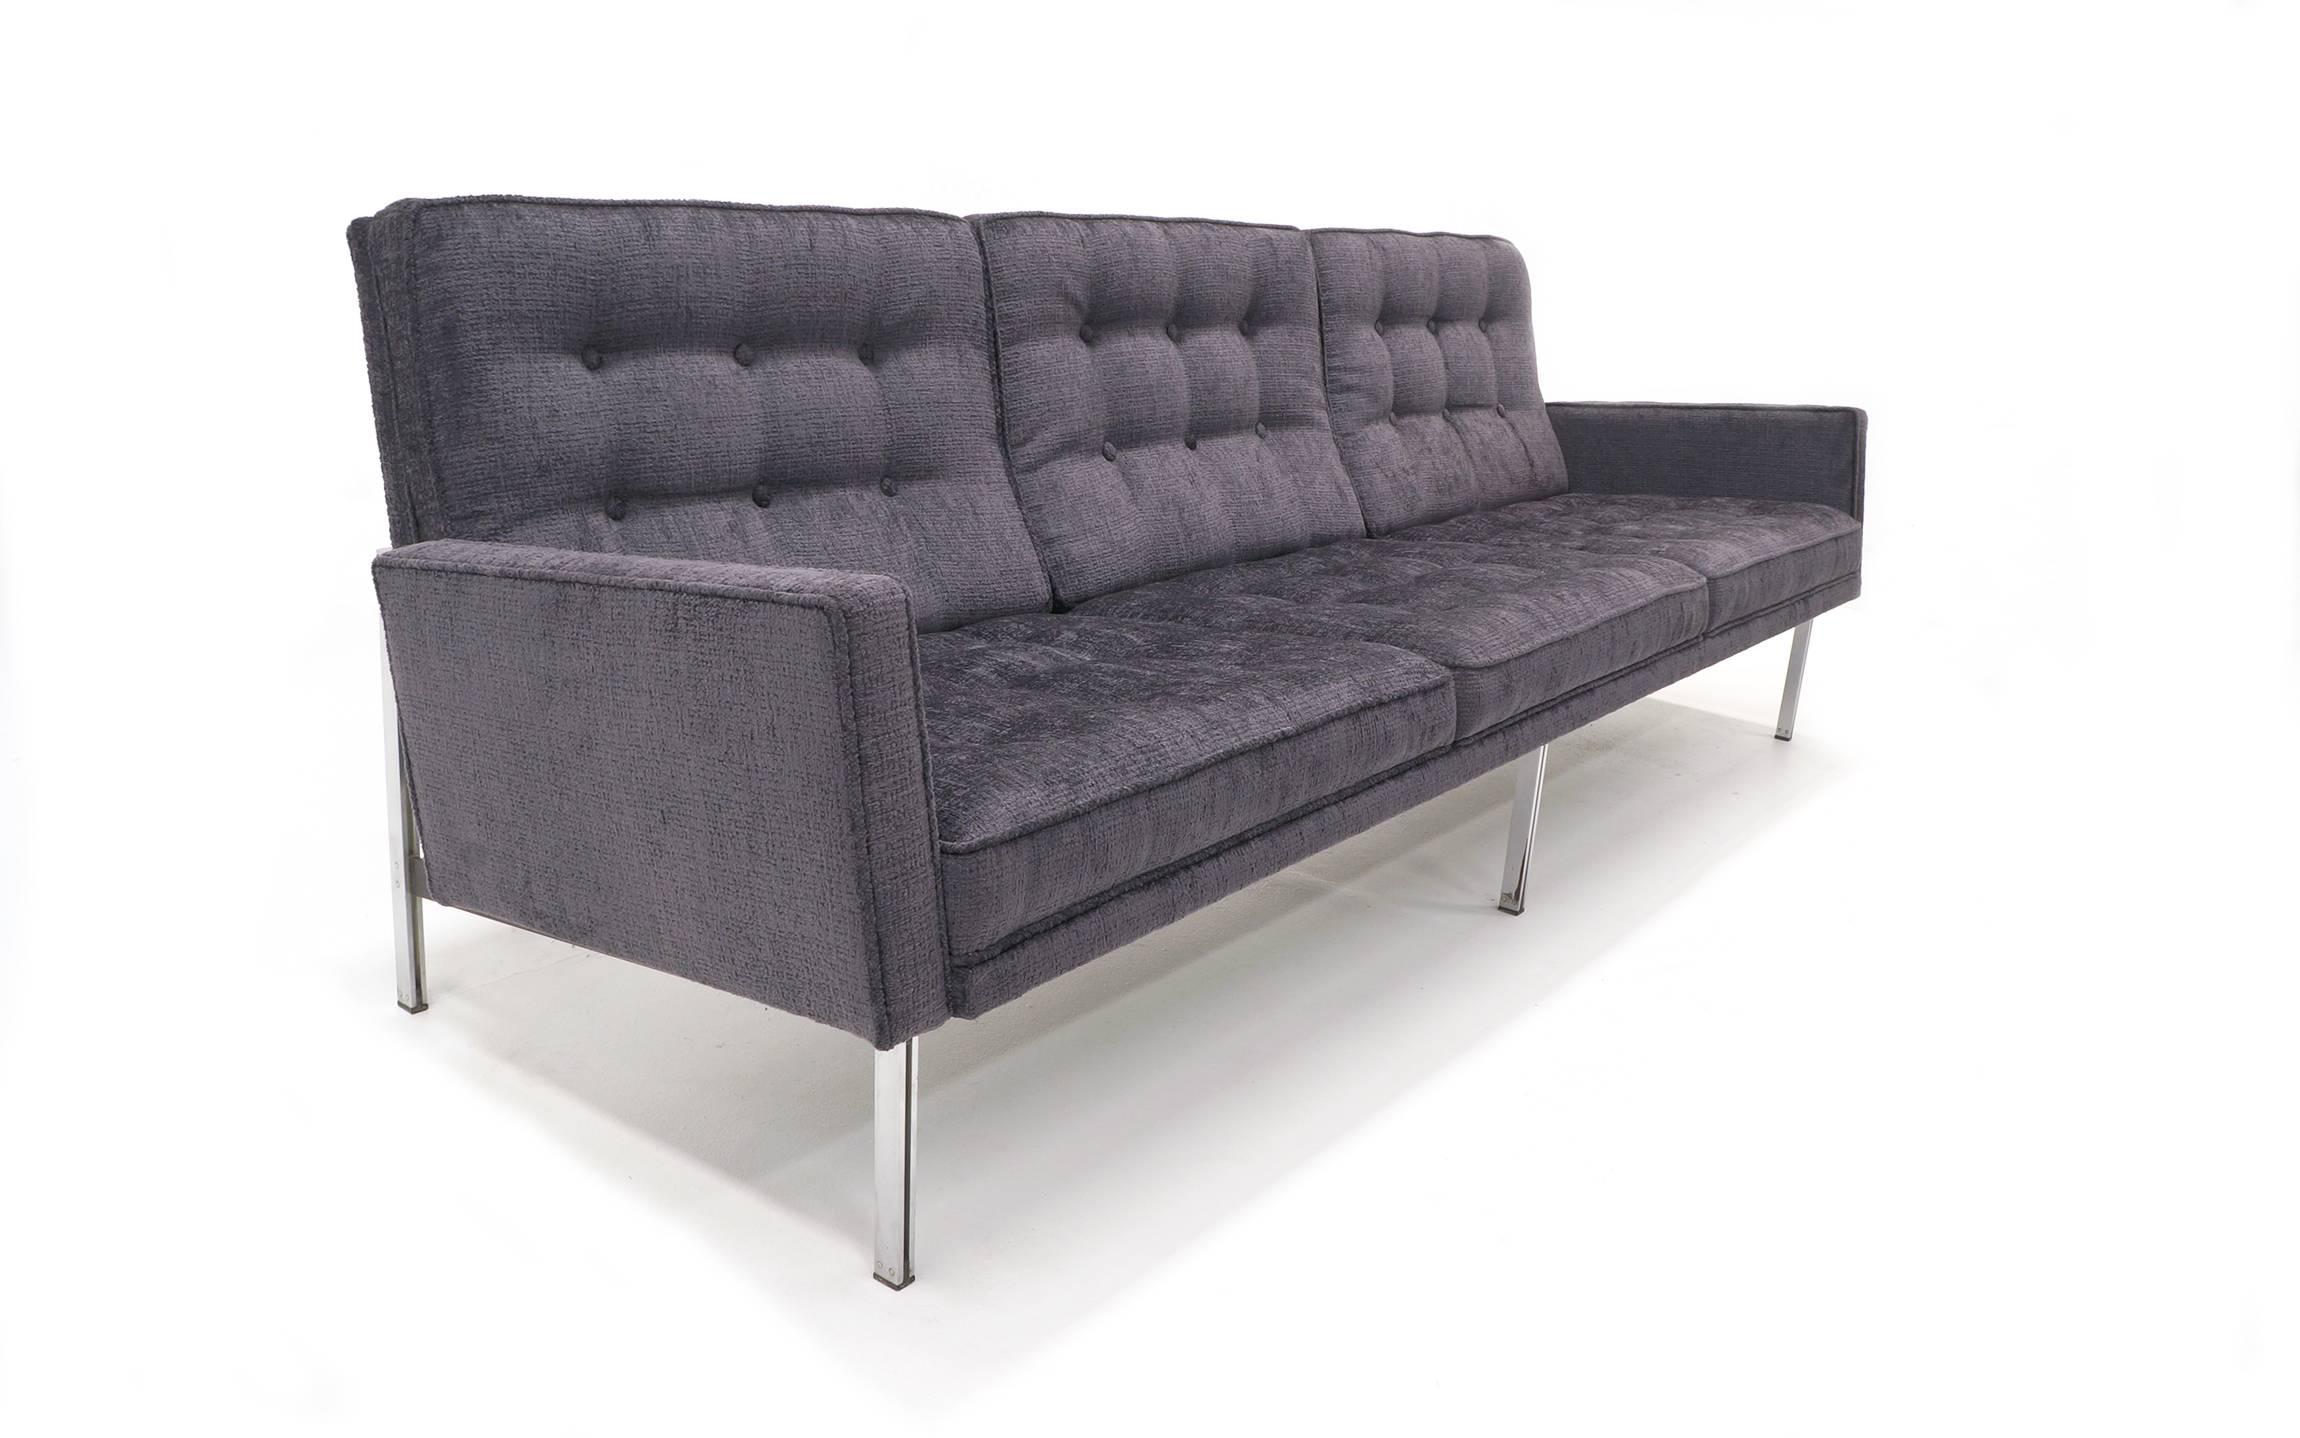 Florence Knoll parallel bar sofa with arms. Restored and upholstered a charcoal / medium to dark gray with just a hint of blue Robert Allen Grand Chenille. This sofa is beautiful.